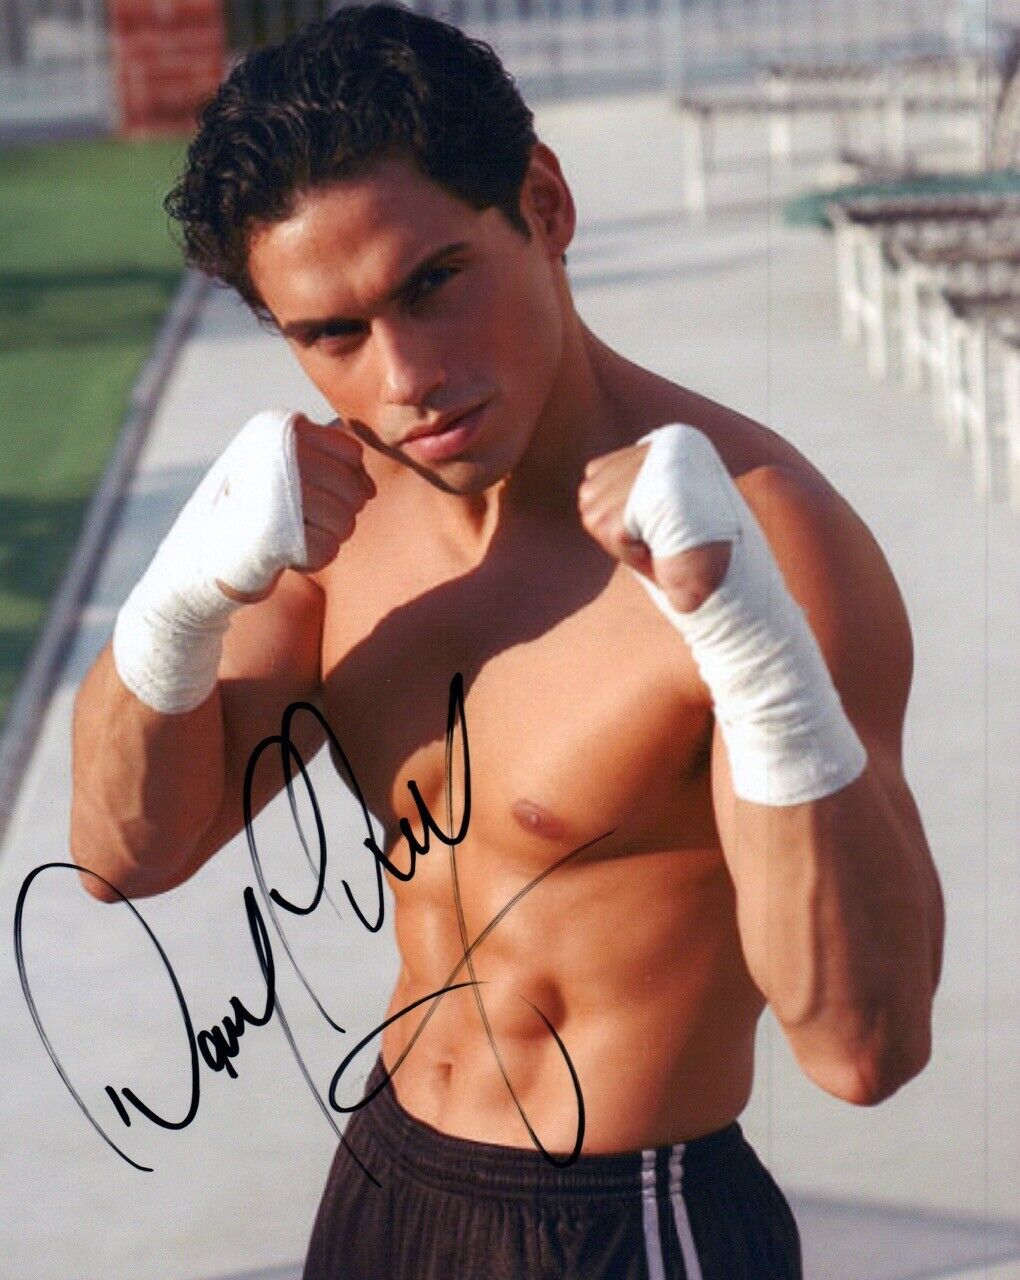 Danny Arroyo Signed Autographed 8x10 Photo Poster painting Handsome Shirtless Actor COA